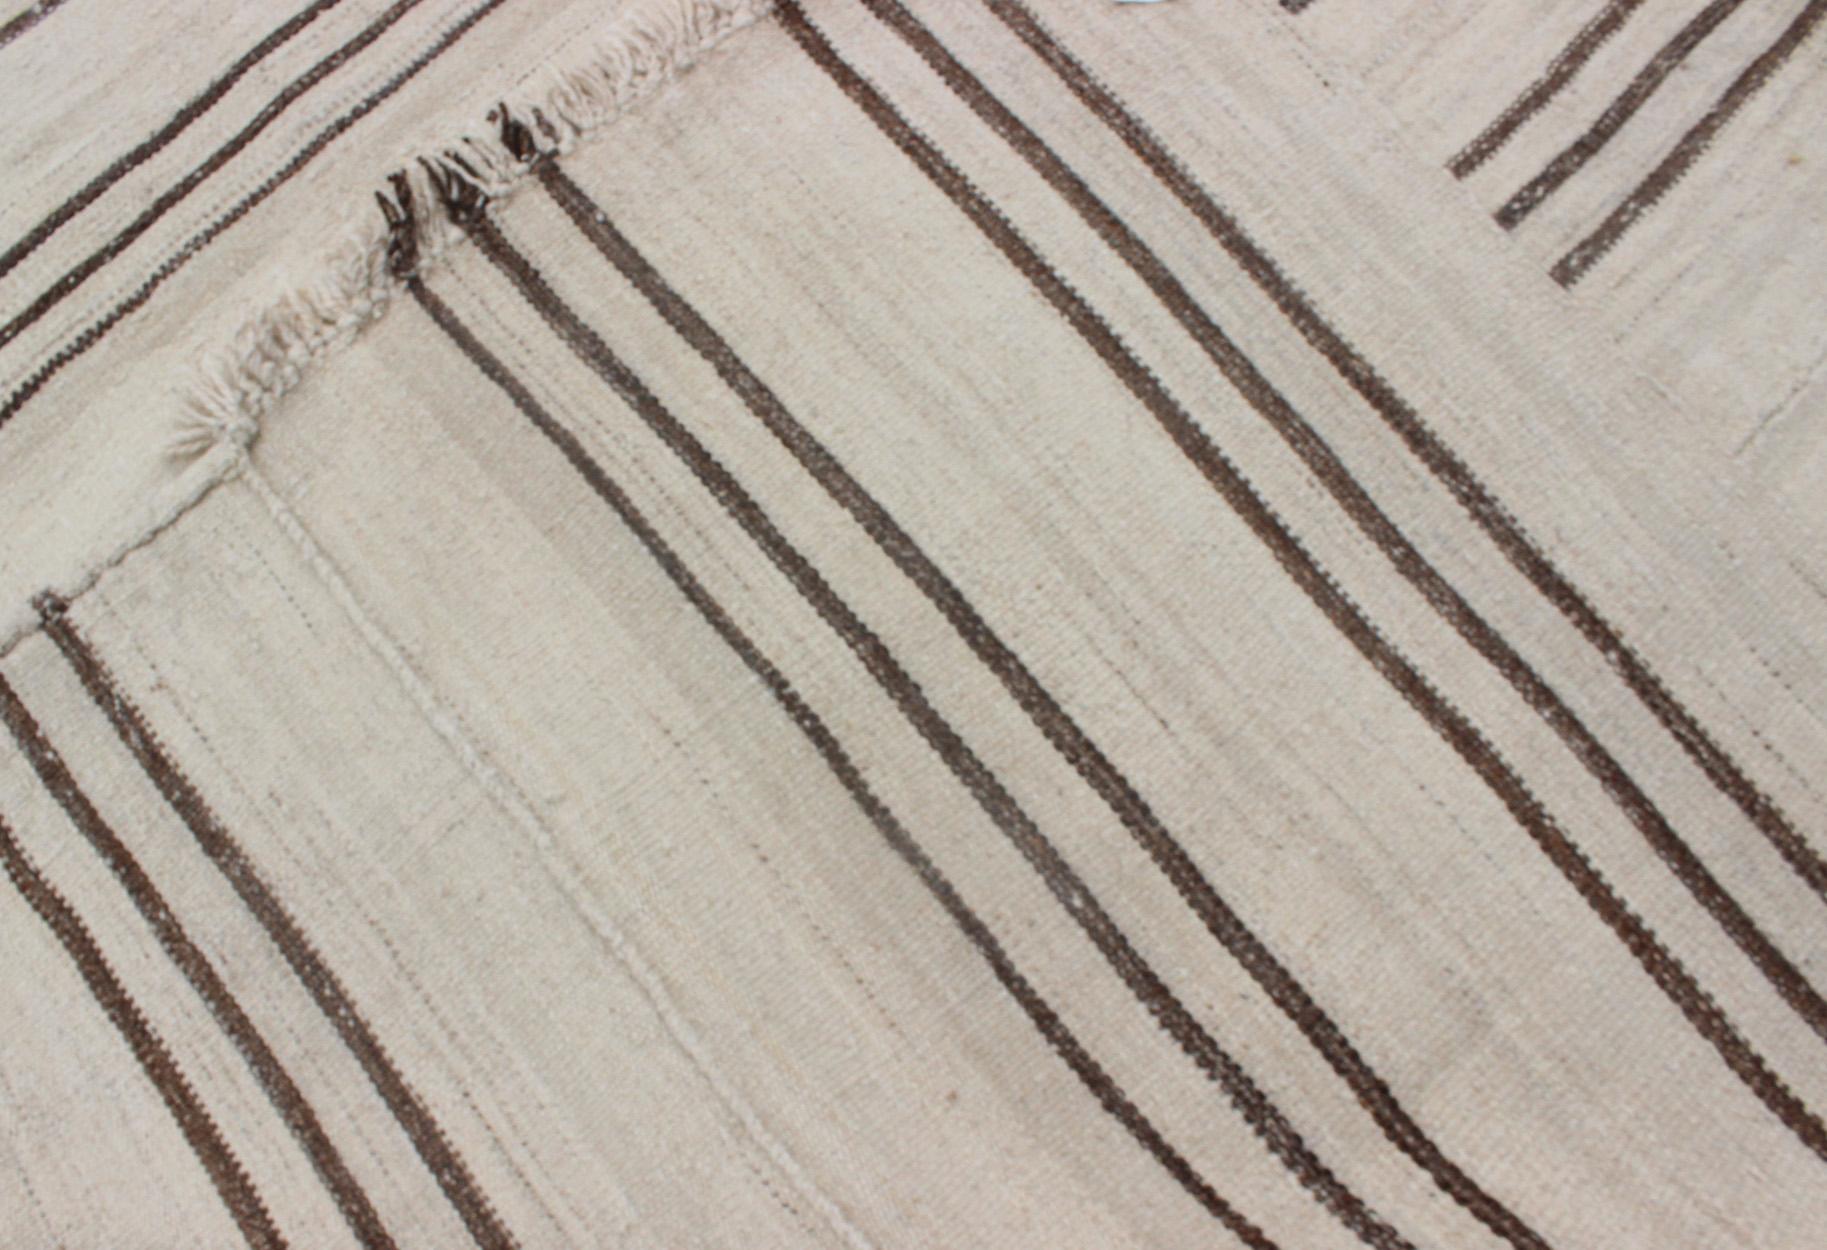 Striped Turkish Vintage Kilim Flat-Weave Rug in Shades of Browns and Ivory For Sale 1